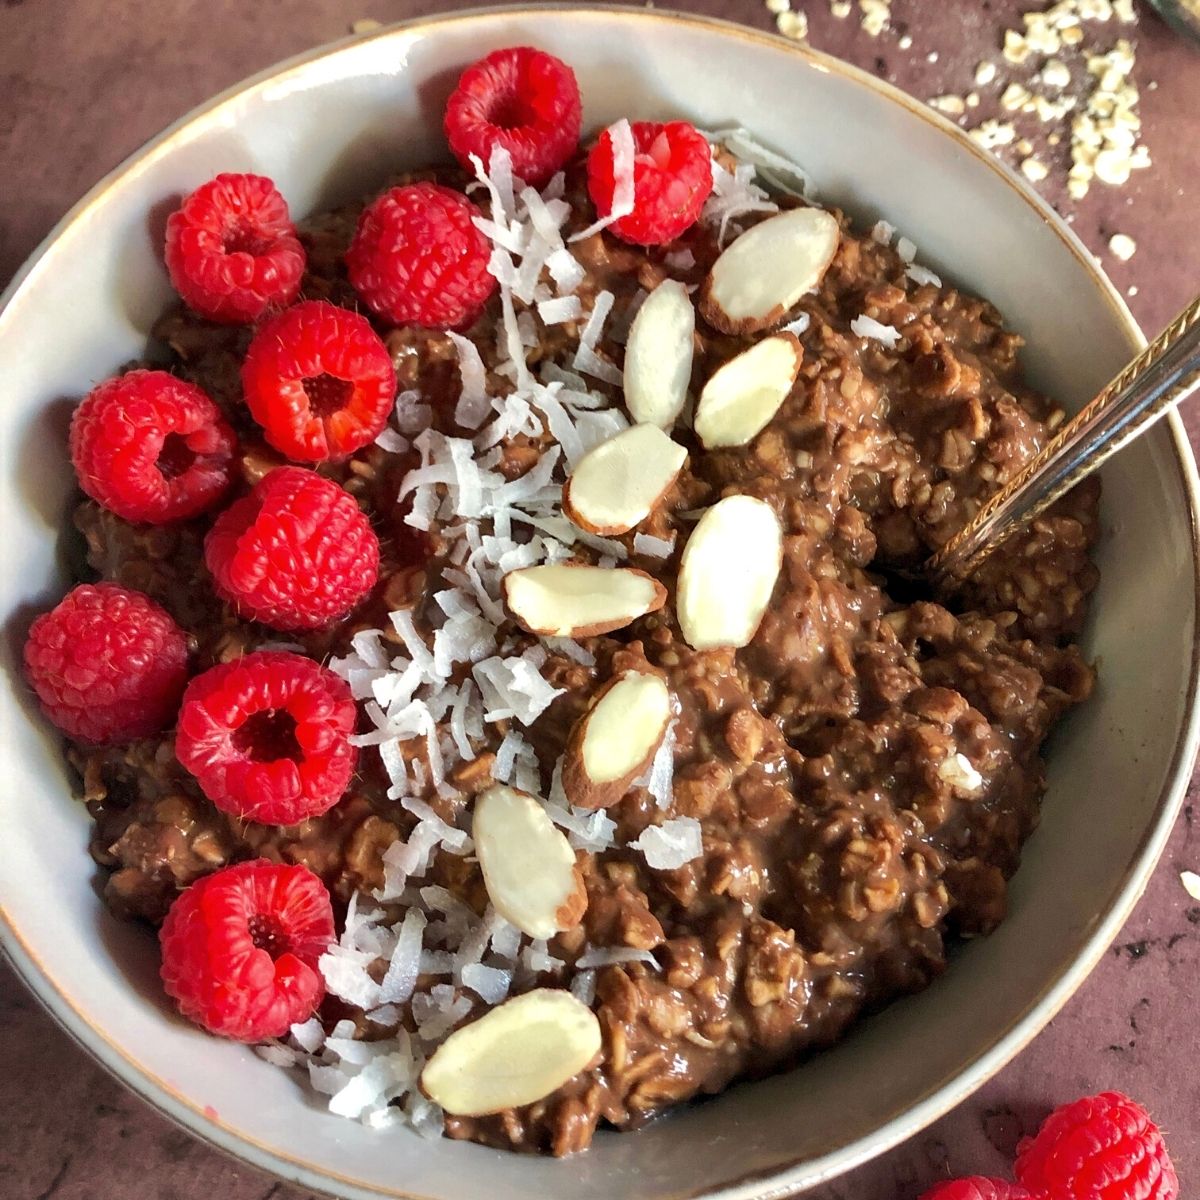 bowl of chocolate oatmeal garnished with raspberries, shredded coconut, and sliced almonds